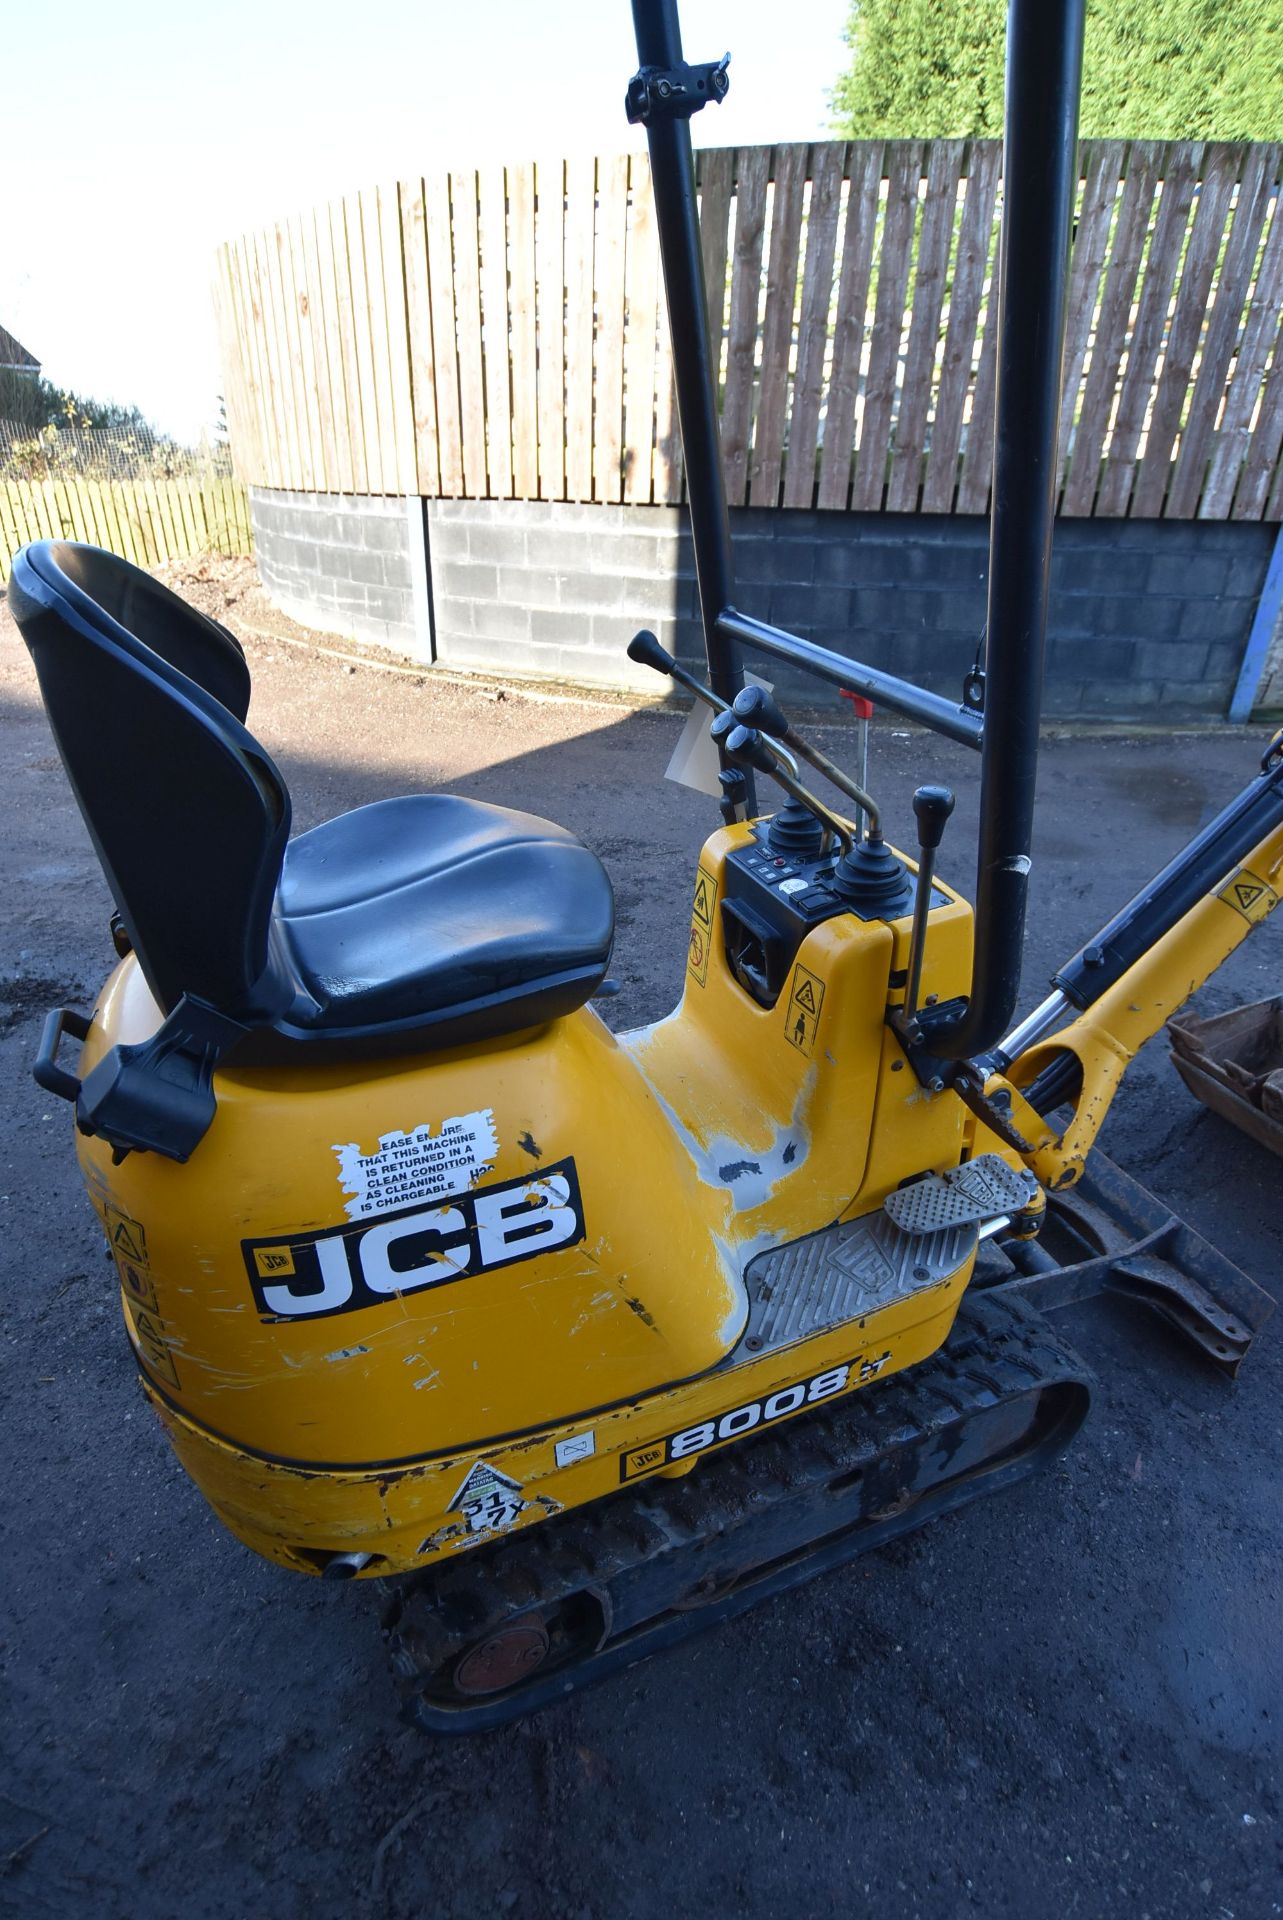 JCB 8008 CTS 950kg TRACKED COMPACT EXCAVATOR, serial no. 02410775, year of manufacture 2015, - Image 7 of 11